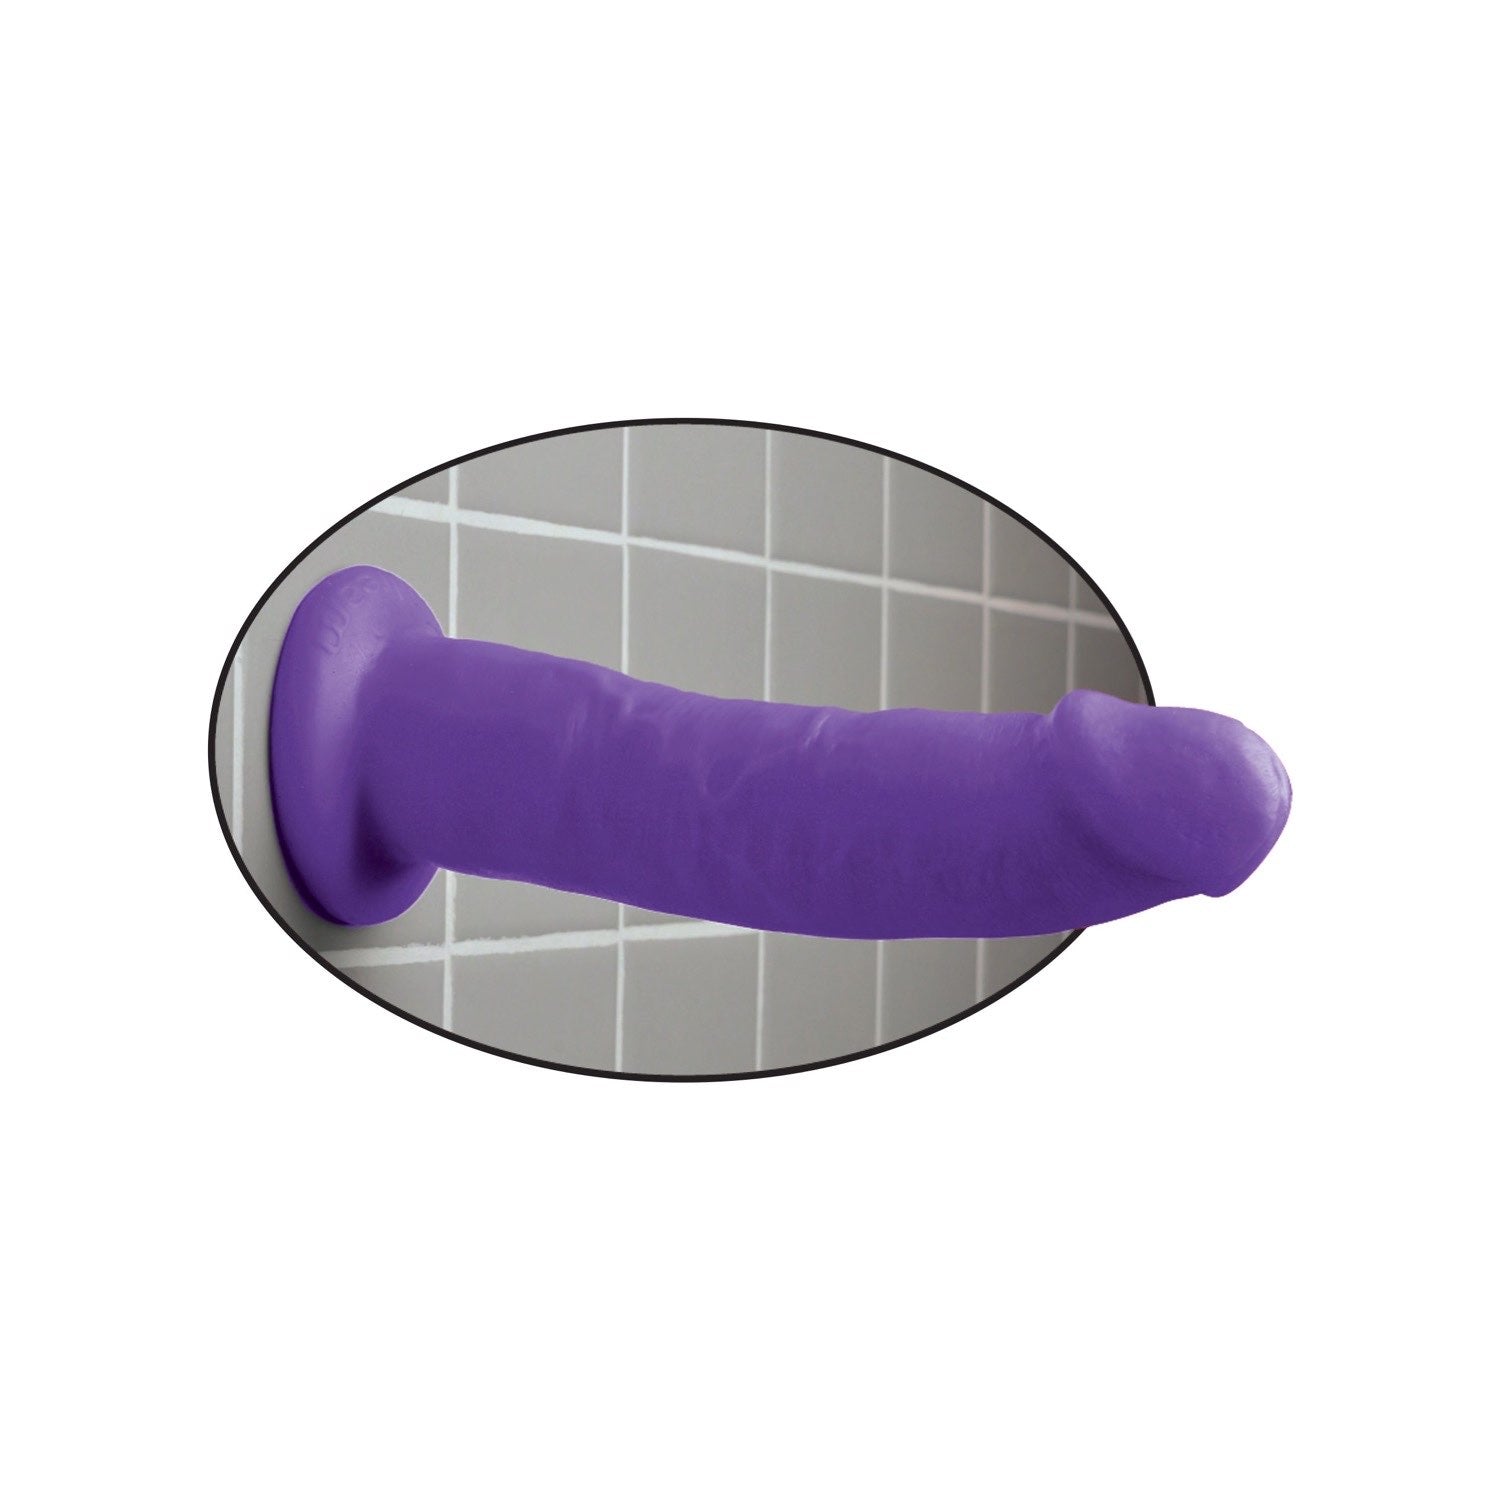 Dillio 9&quot; Dildo - Purple 22.9 cm Dong by Pipedream